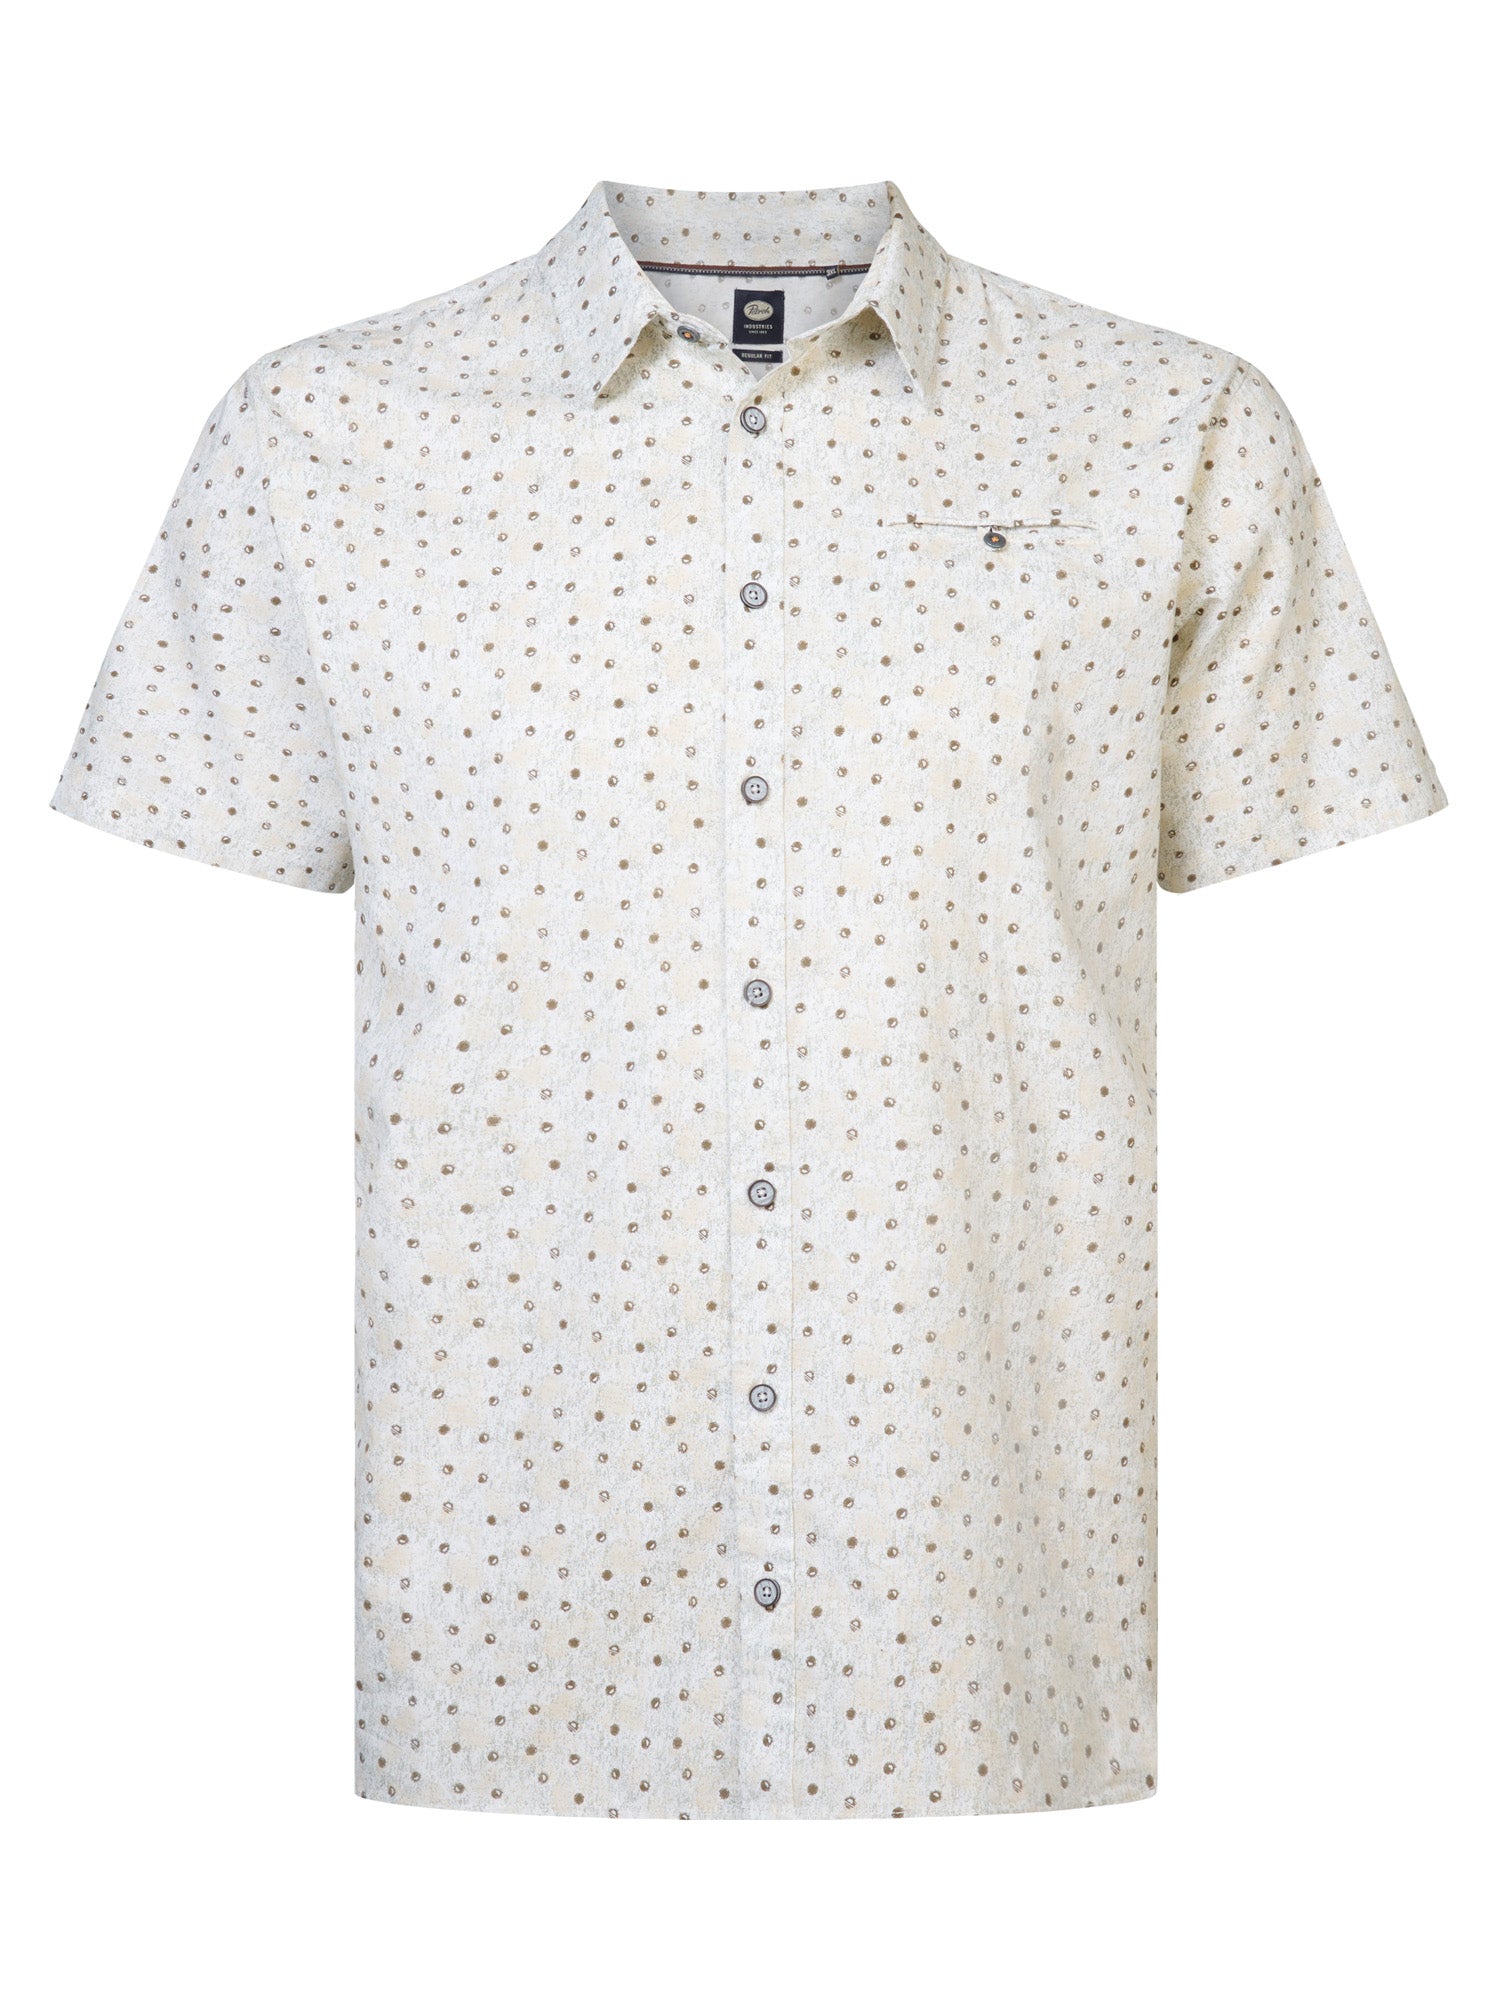 Online Store Petrol Industries® Print Shirt | Official Rockport Plus Size All-over Beach